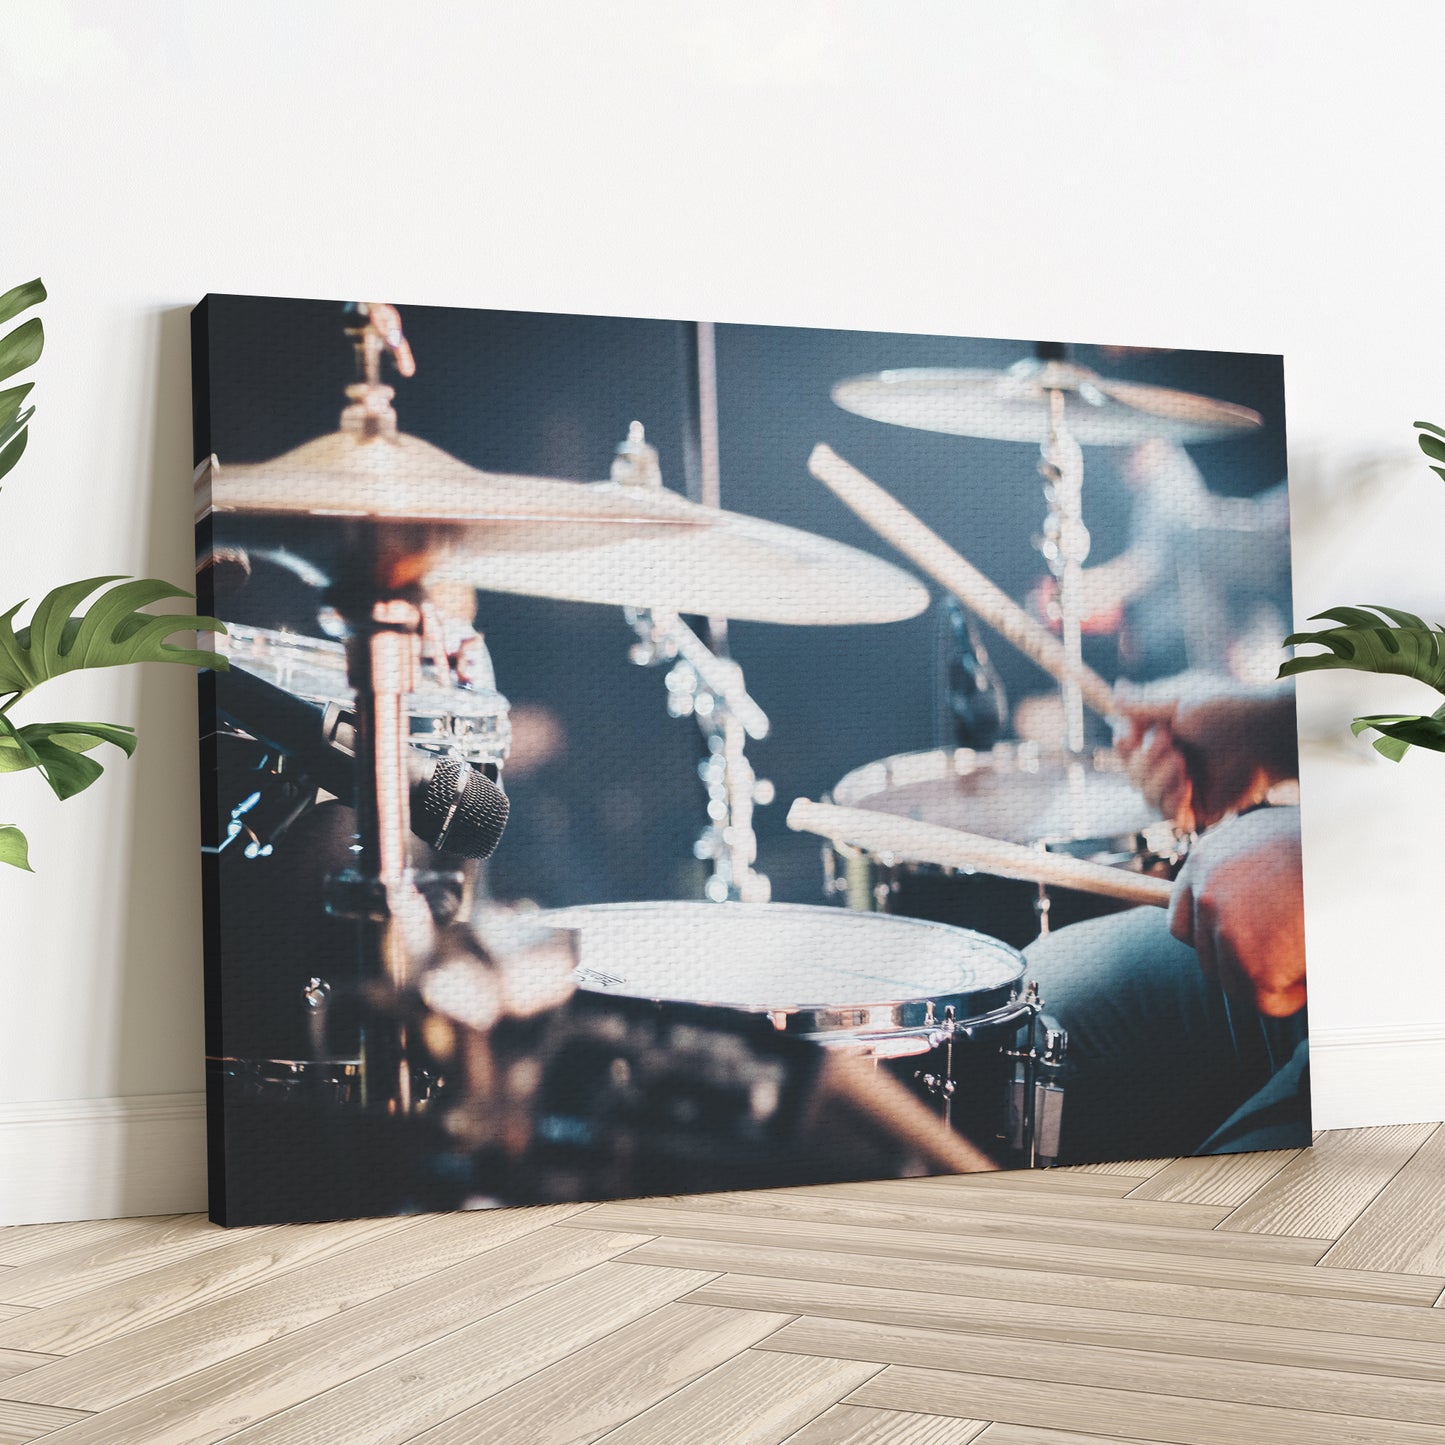 Drums Playing Canvas Wall Art - Image by Tailored Canvases